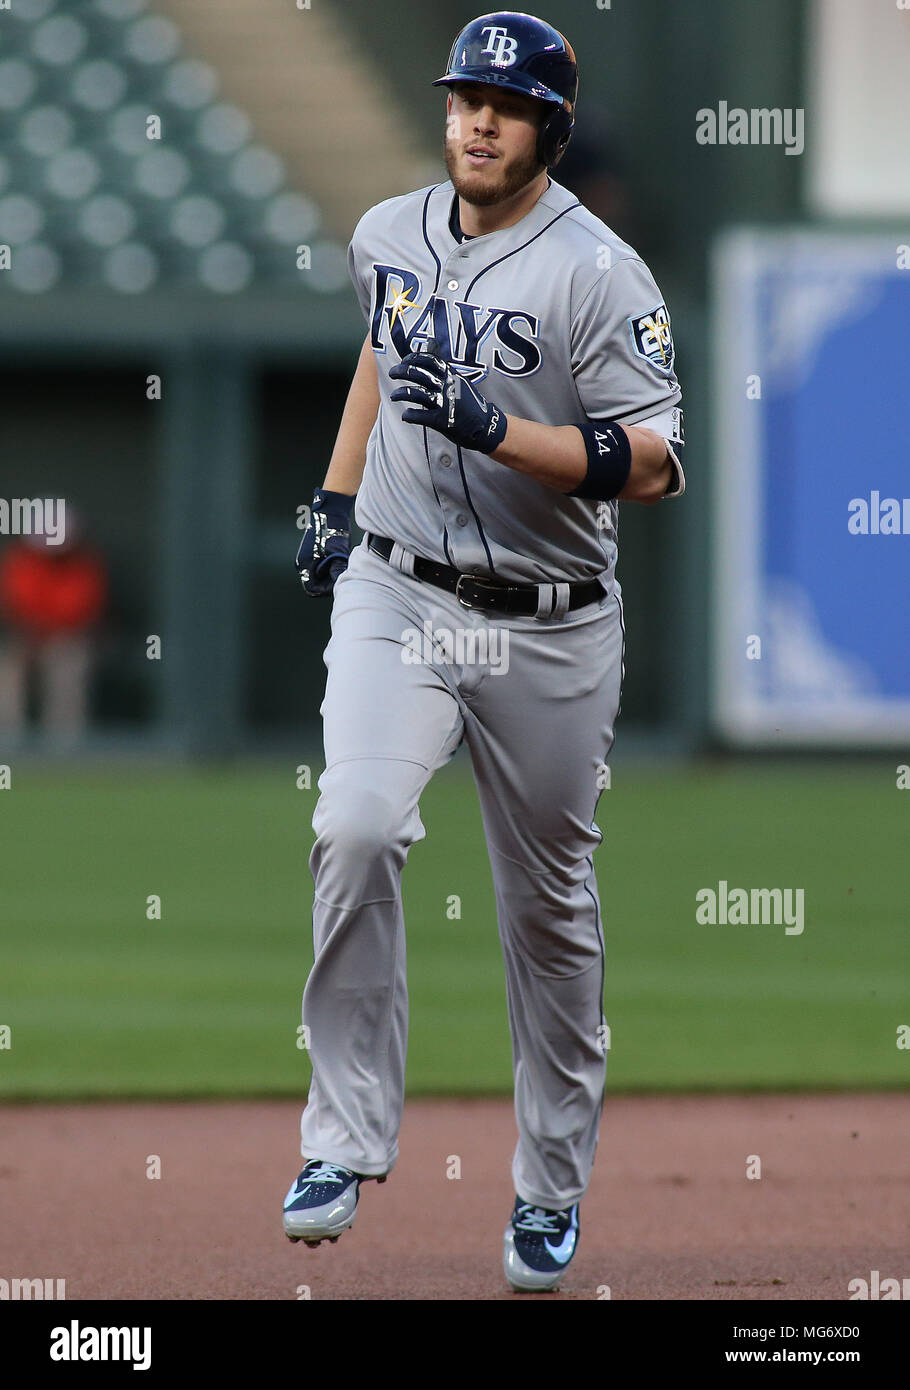 Baltimore, Maryland, USA. 26th Apr, 2018. Tampa Bay Rays first baseman C.J. Cron (44) rounds the bases after he hit a homerun during a match between the Baltimore Orioles and the Tampa Bay Rays at Camden Yards in Baltimore, Maryland. Daniel Kucin Jr./Cal Sport Media/Alamy Live News Stock Photo